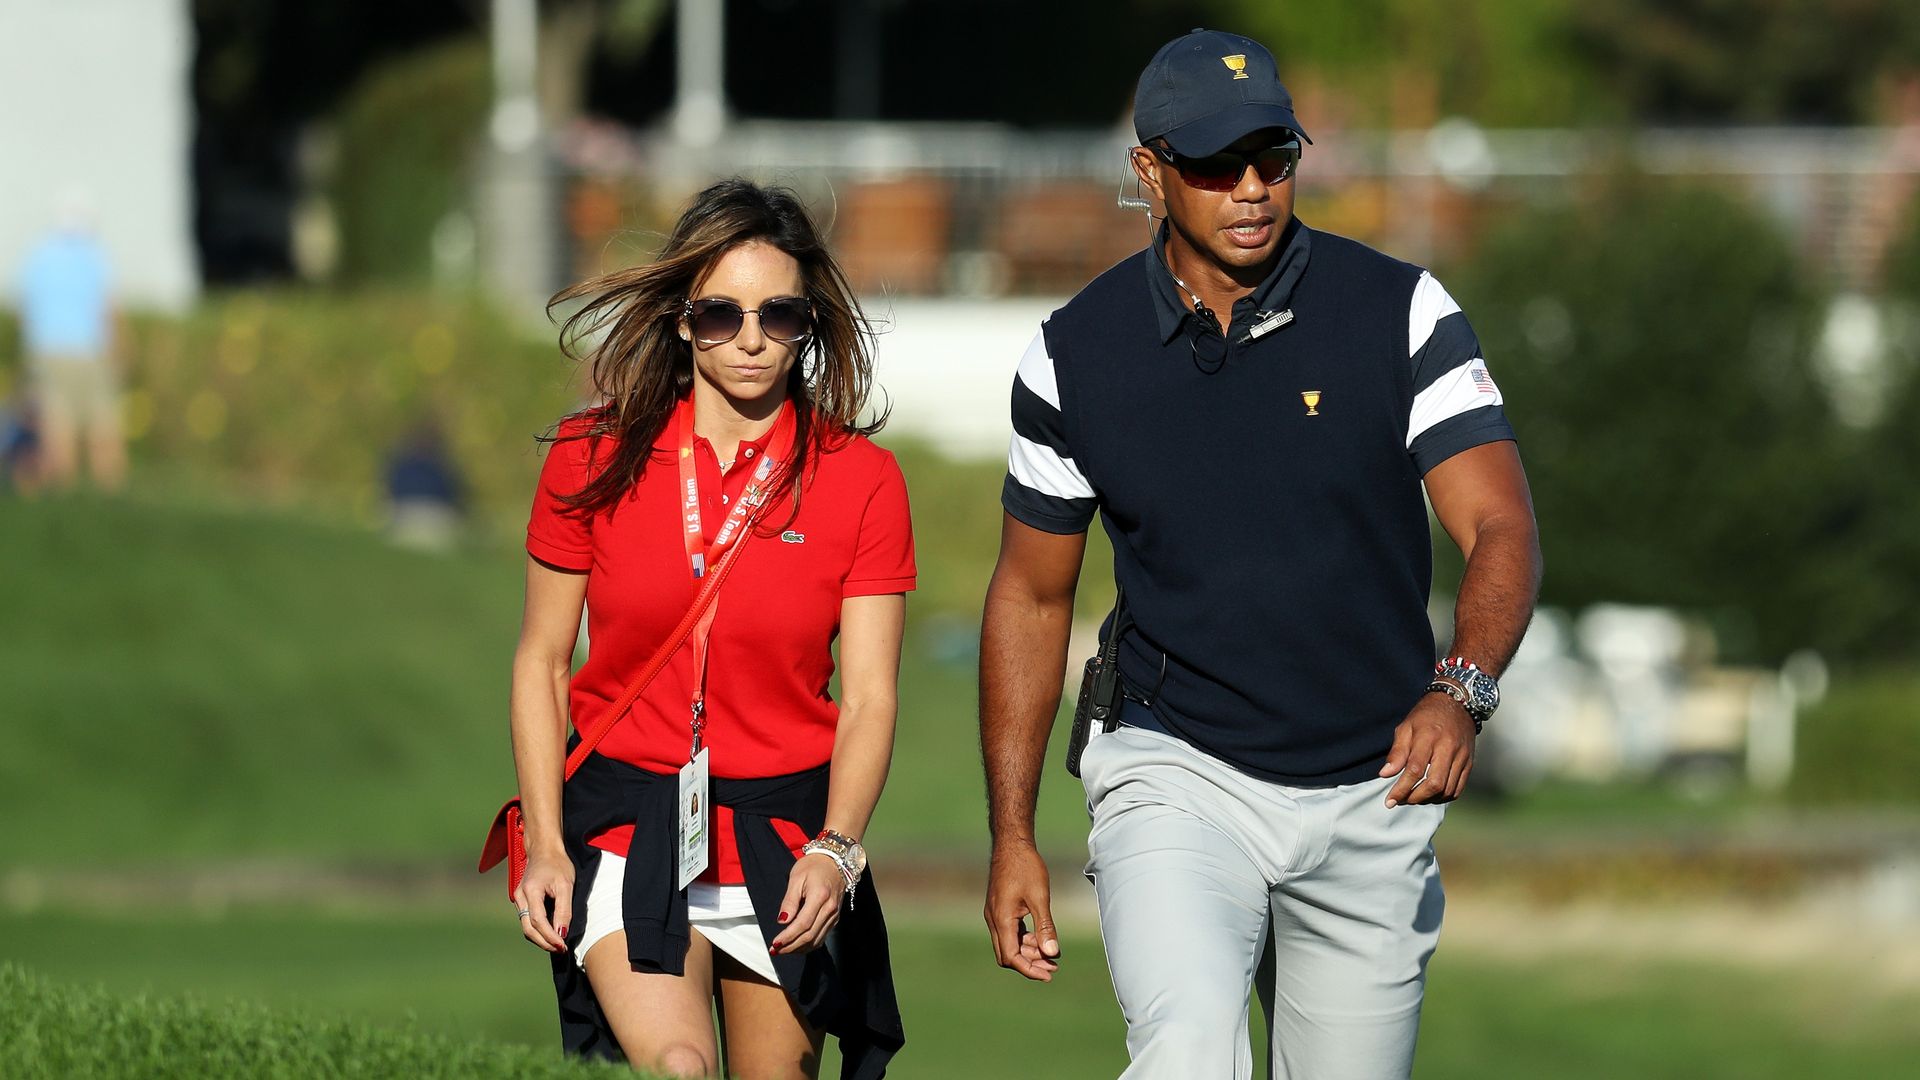 Tiger Woods and Erica Herman walking on golf course